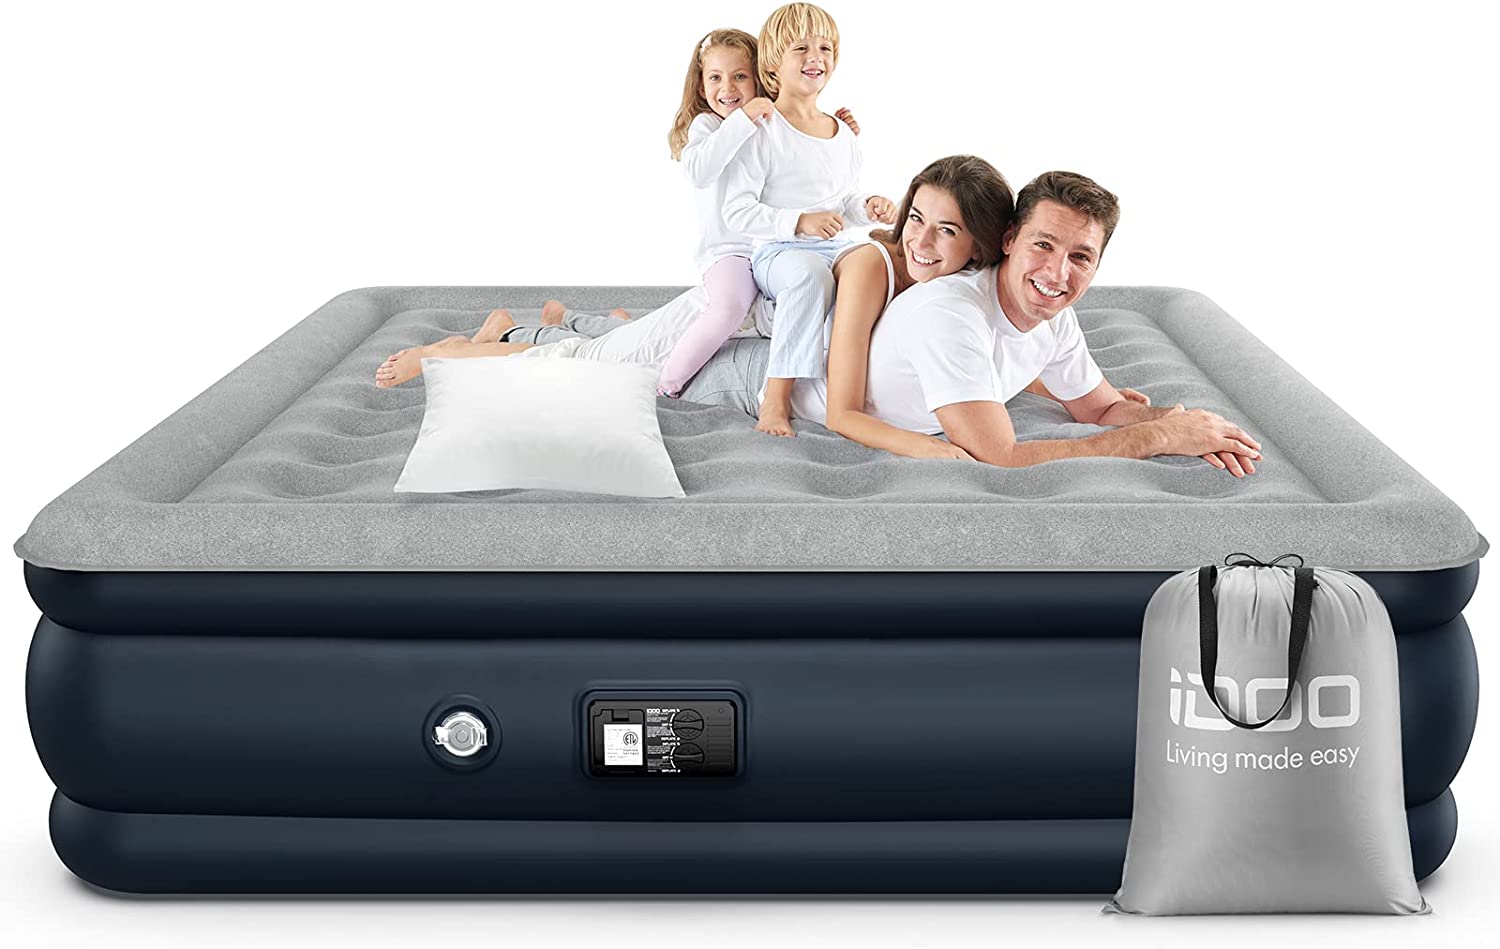 King Size 18" Air Mattress - Air Bed Best Seller king sale by idoo